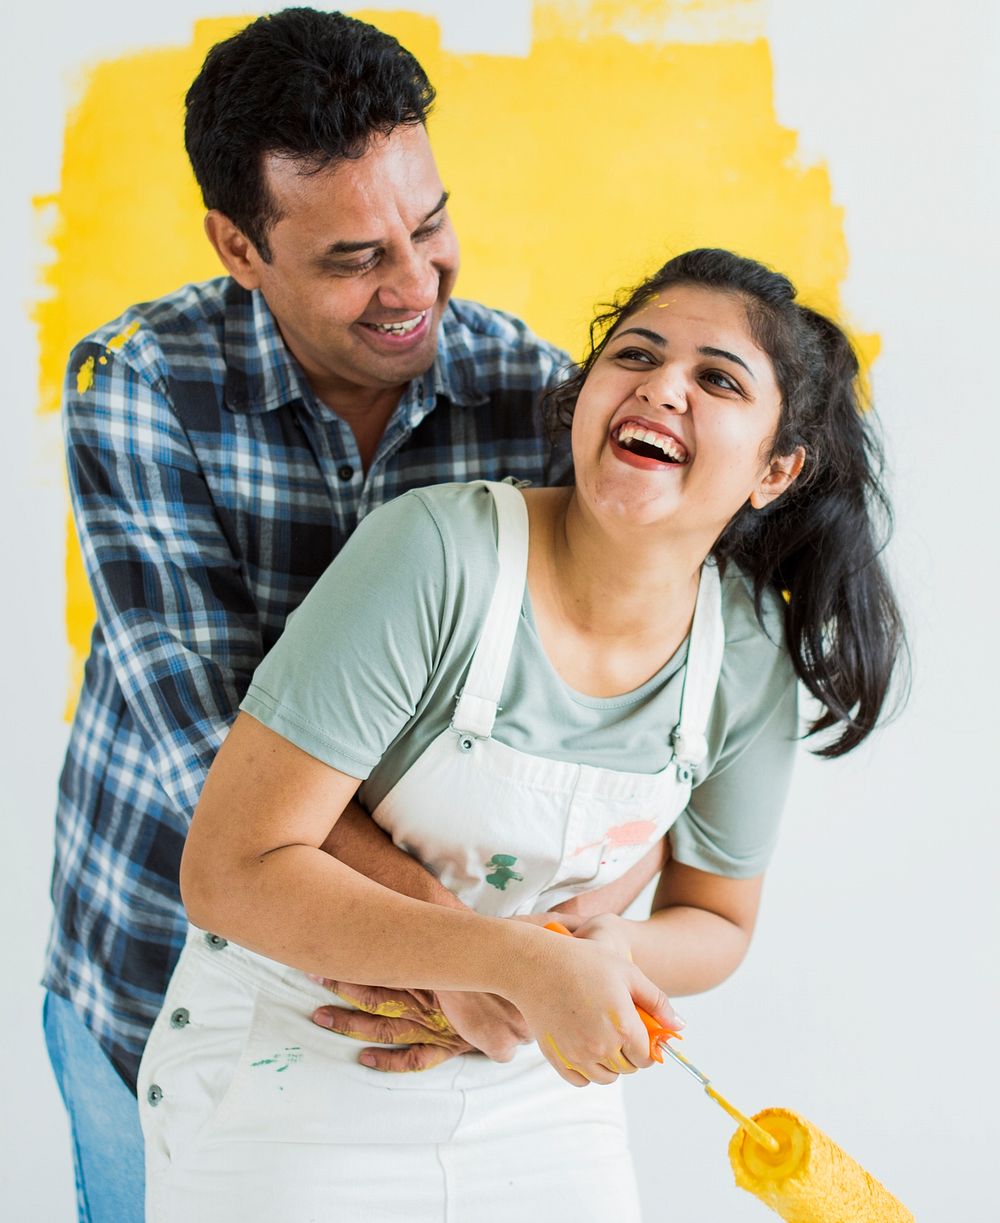 Cheerful couple painting the walls yellow